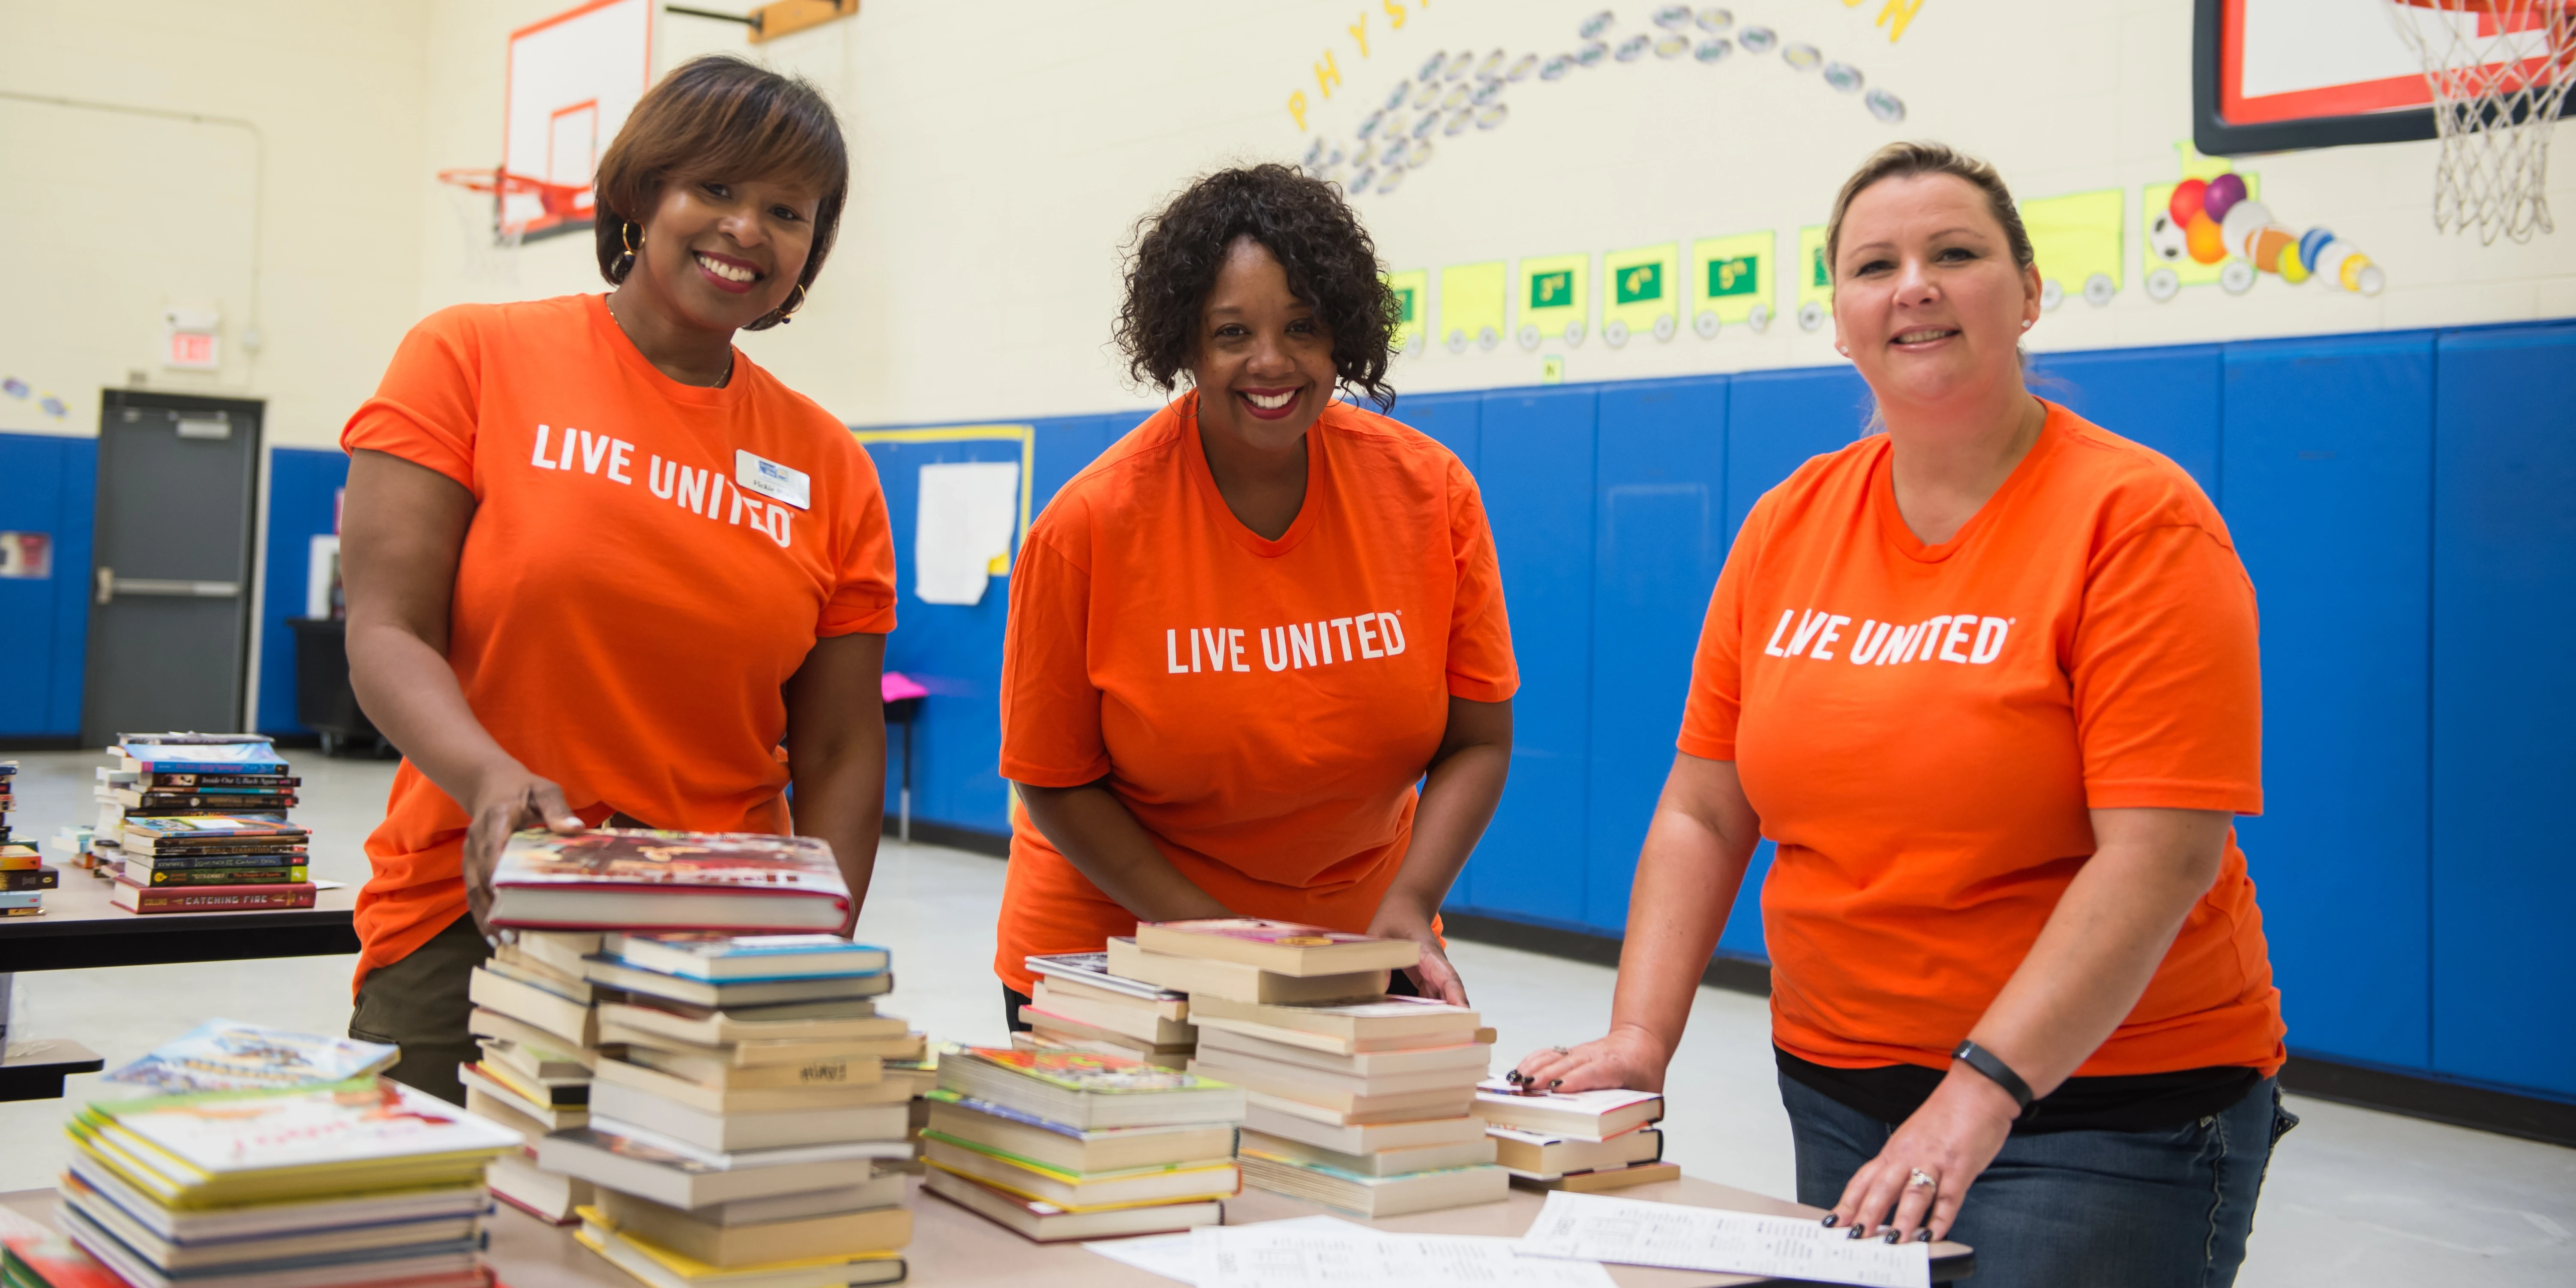 Members of the charity organization "United Way" in Michigan.